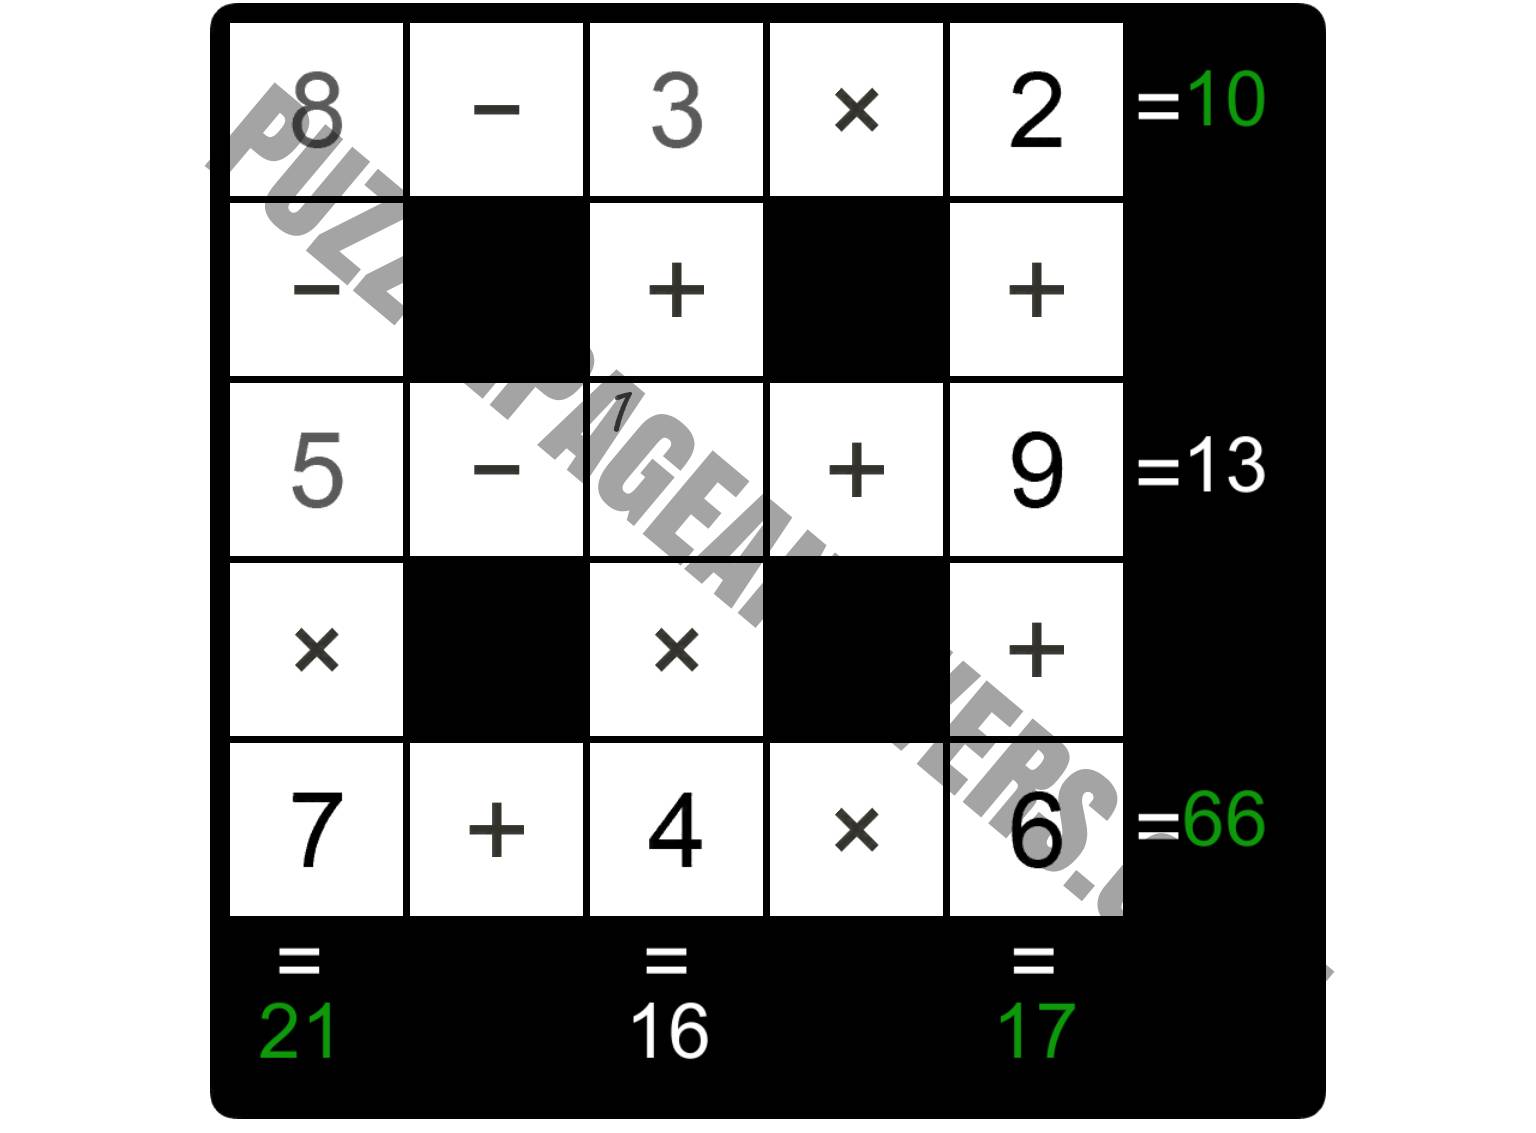 Puzzle Page Cross Sum August 1 2022 Answers PuzzlePageAnswers com